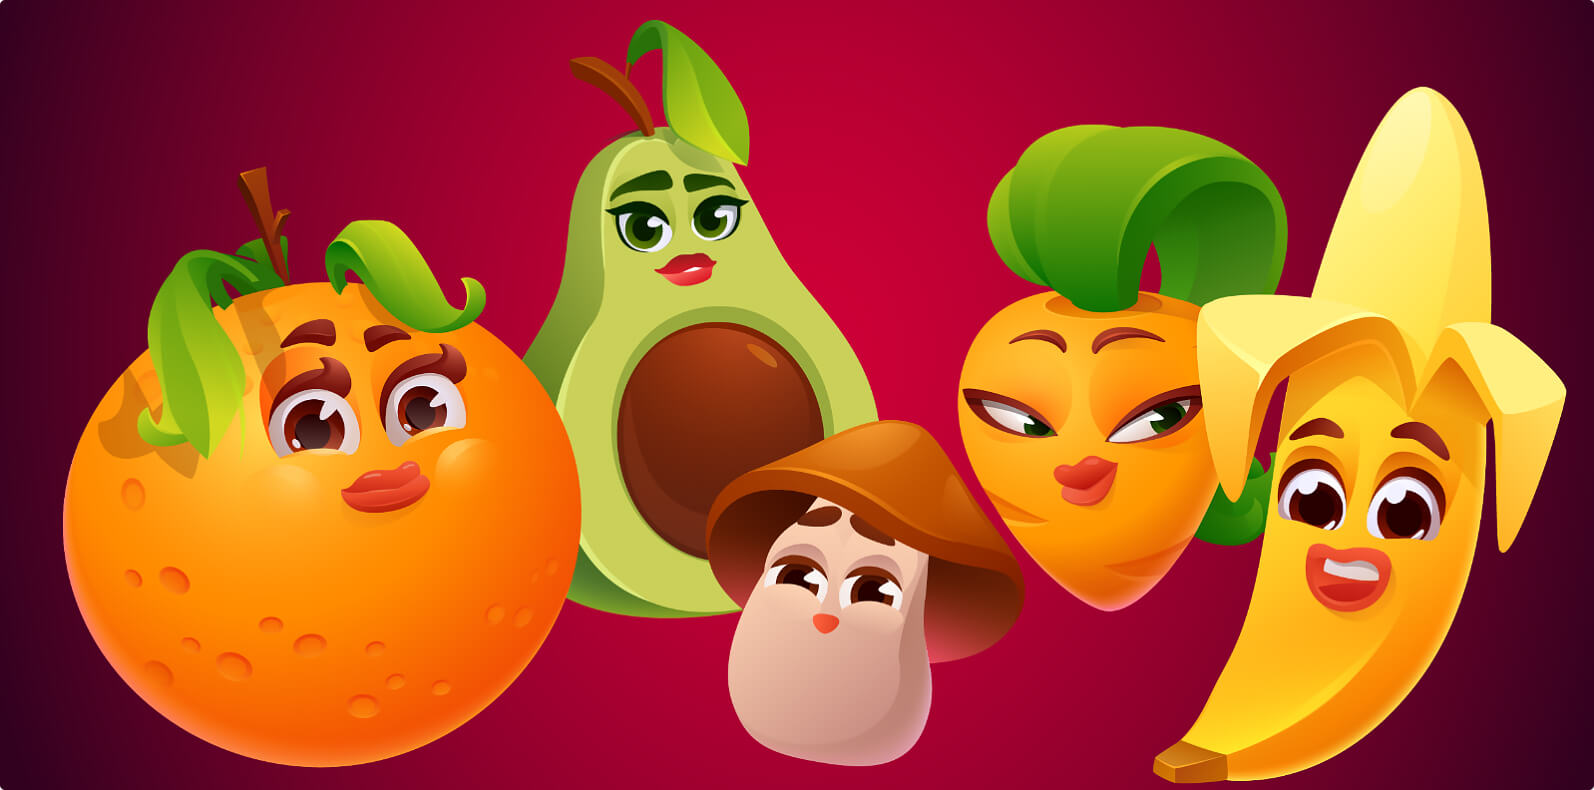 Action Vitas: Cartoon vegetables and fruits design